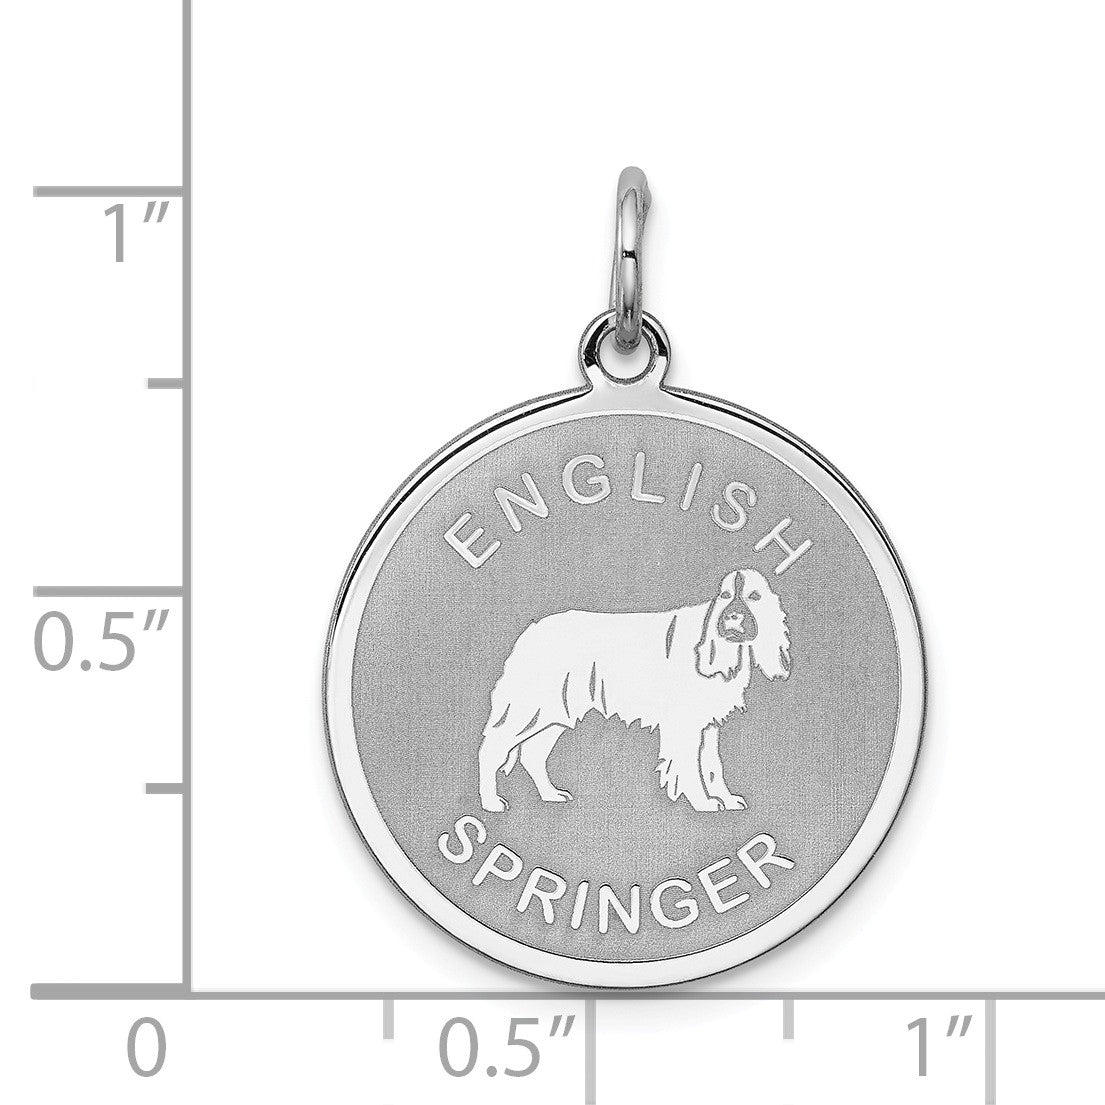 Alternate view of the Sterling Silver Laser Etched English Springer Dog Pendant, 19mm by The Black Bow Jewelry Co.